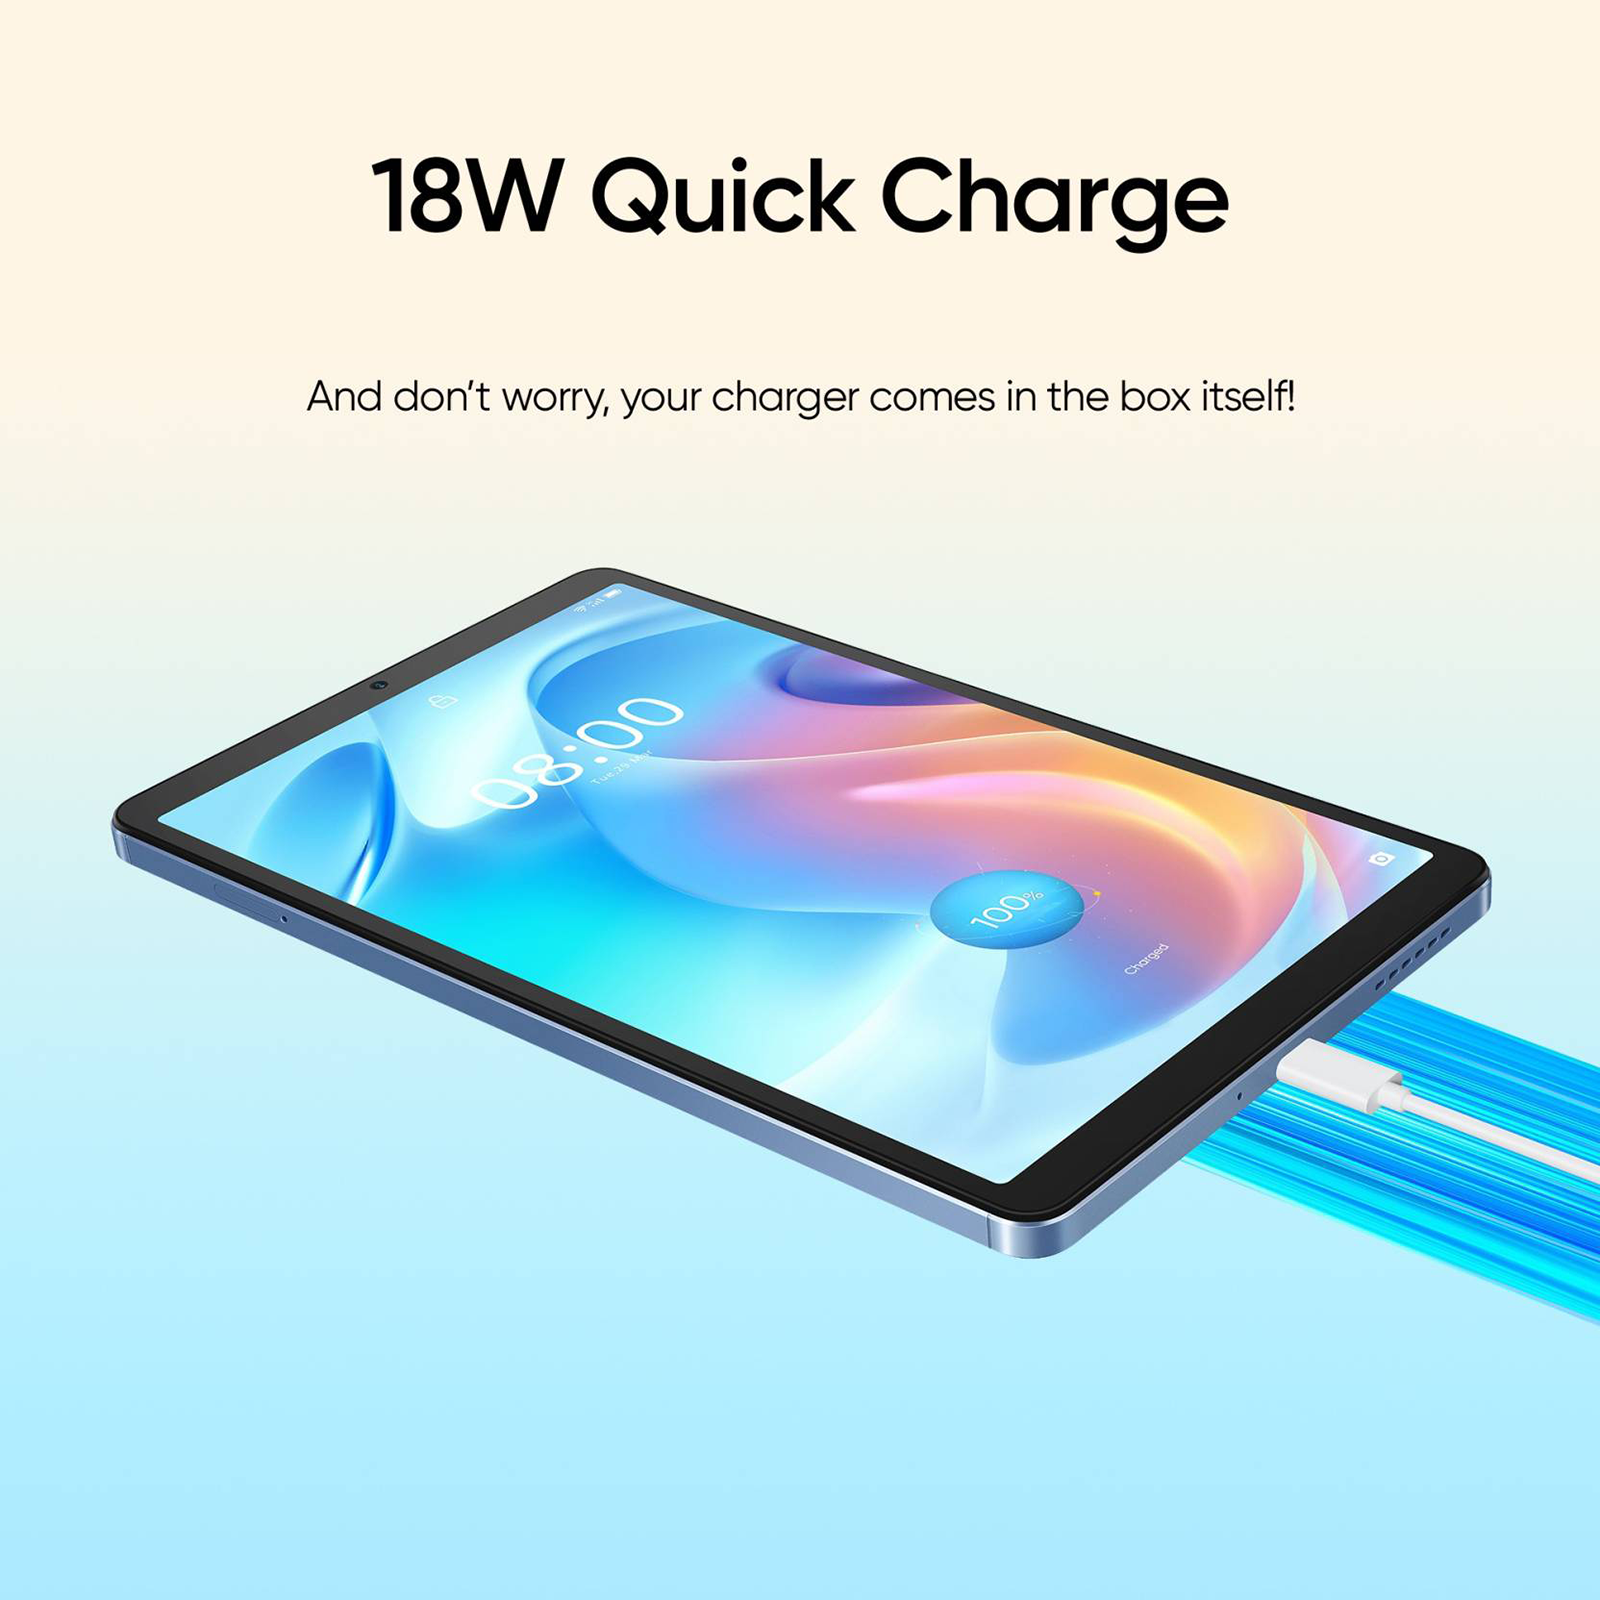 Buy realme Pad Mini Wi-Fi+4G Android Tablet (8.7 Inch, 6GB RAM, 128GB ROM,  Grey) online at best prices from Croma. Check product details, reviews &  more. Shop now!